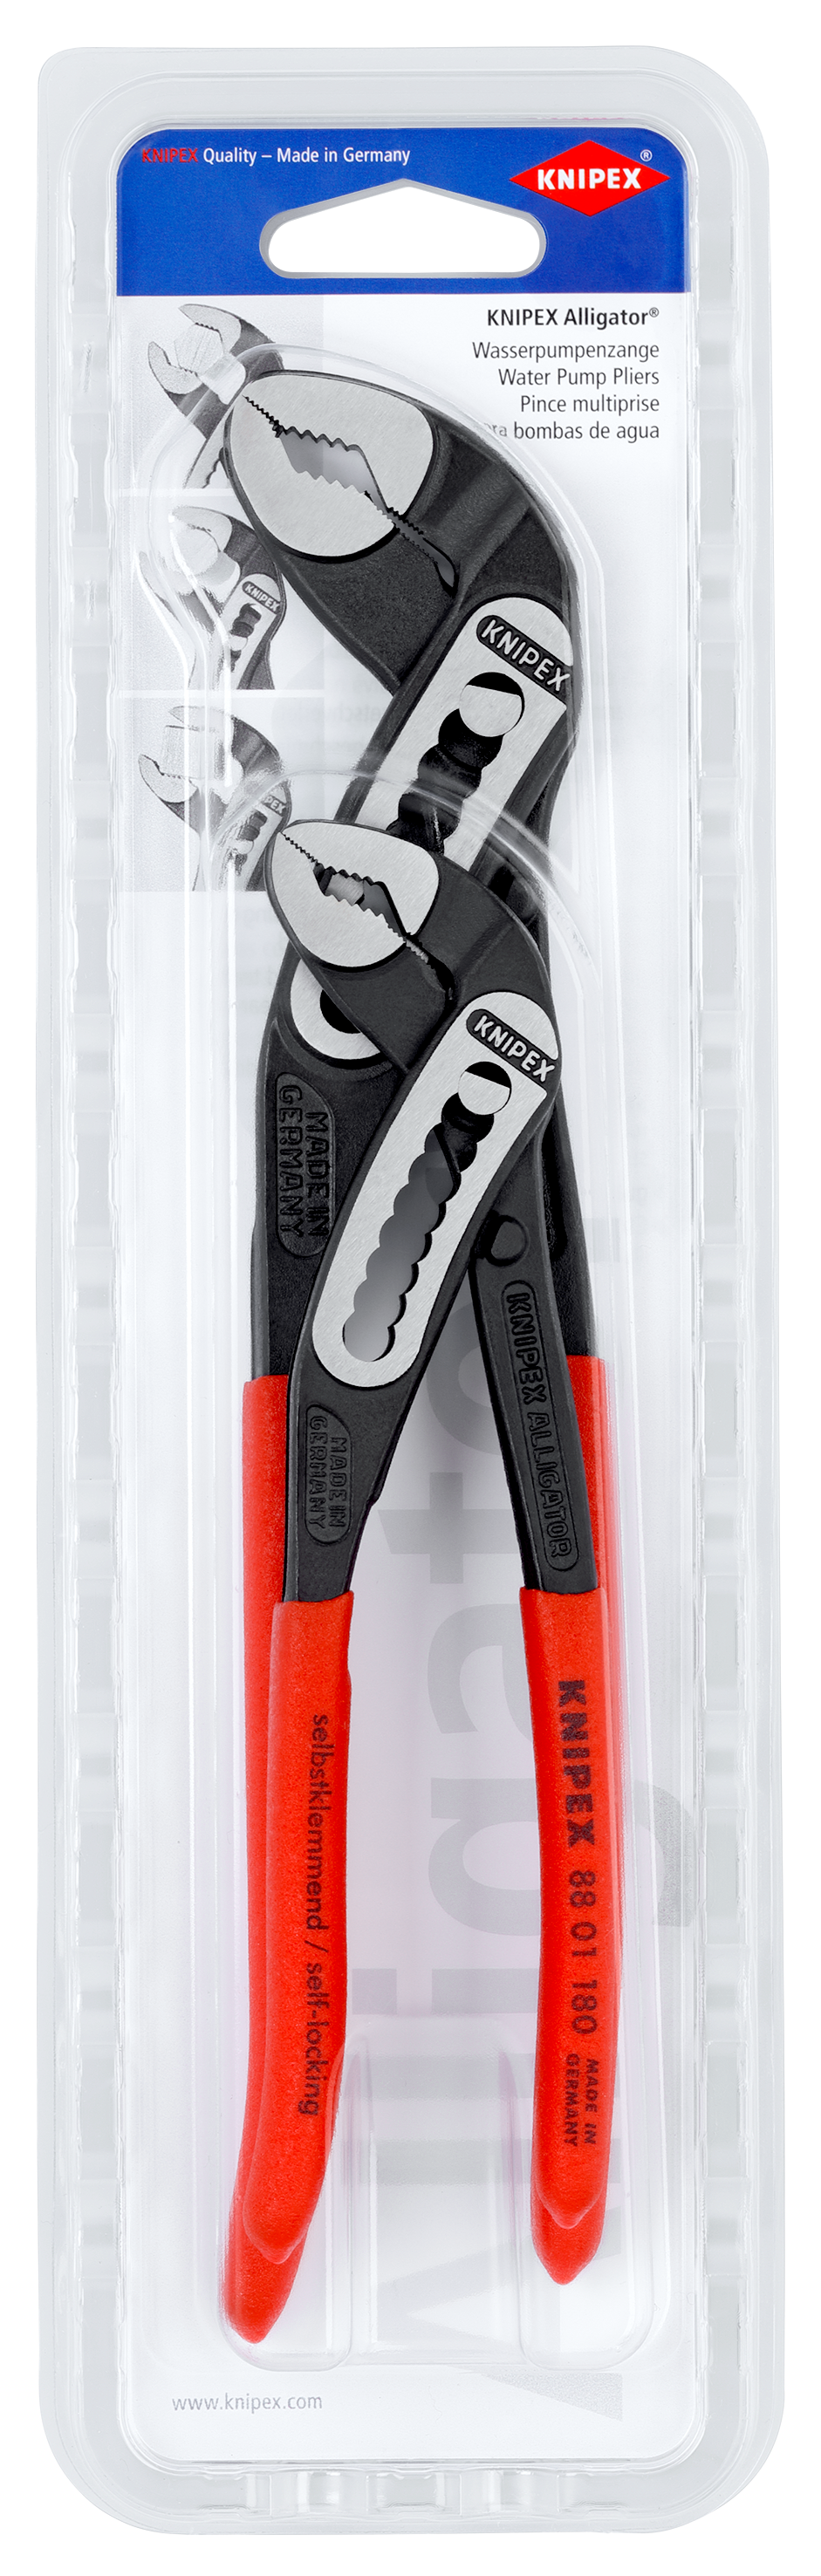 https://www.knipex.com/sites/default/files/pictures/IM0010544.png